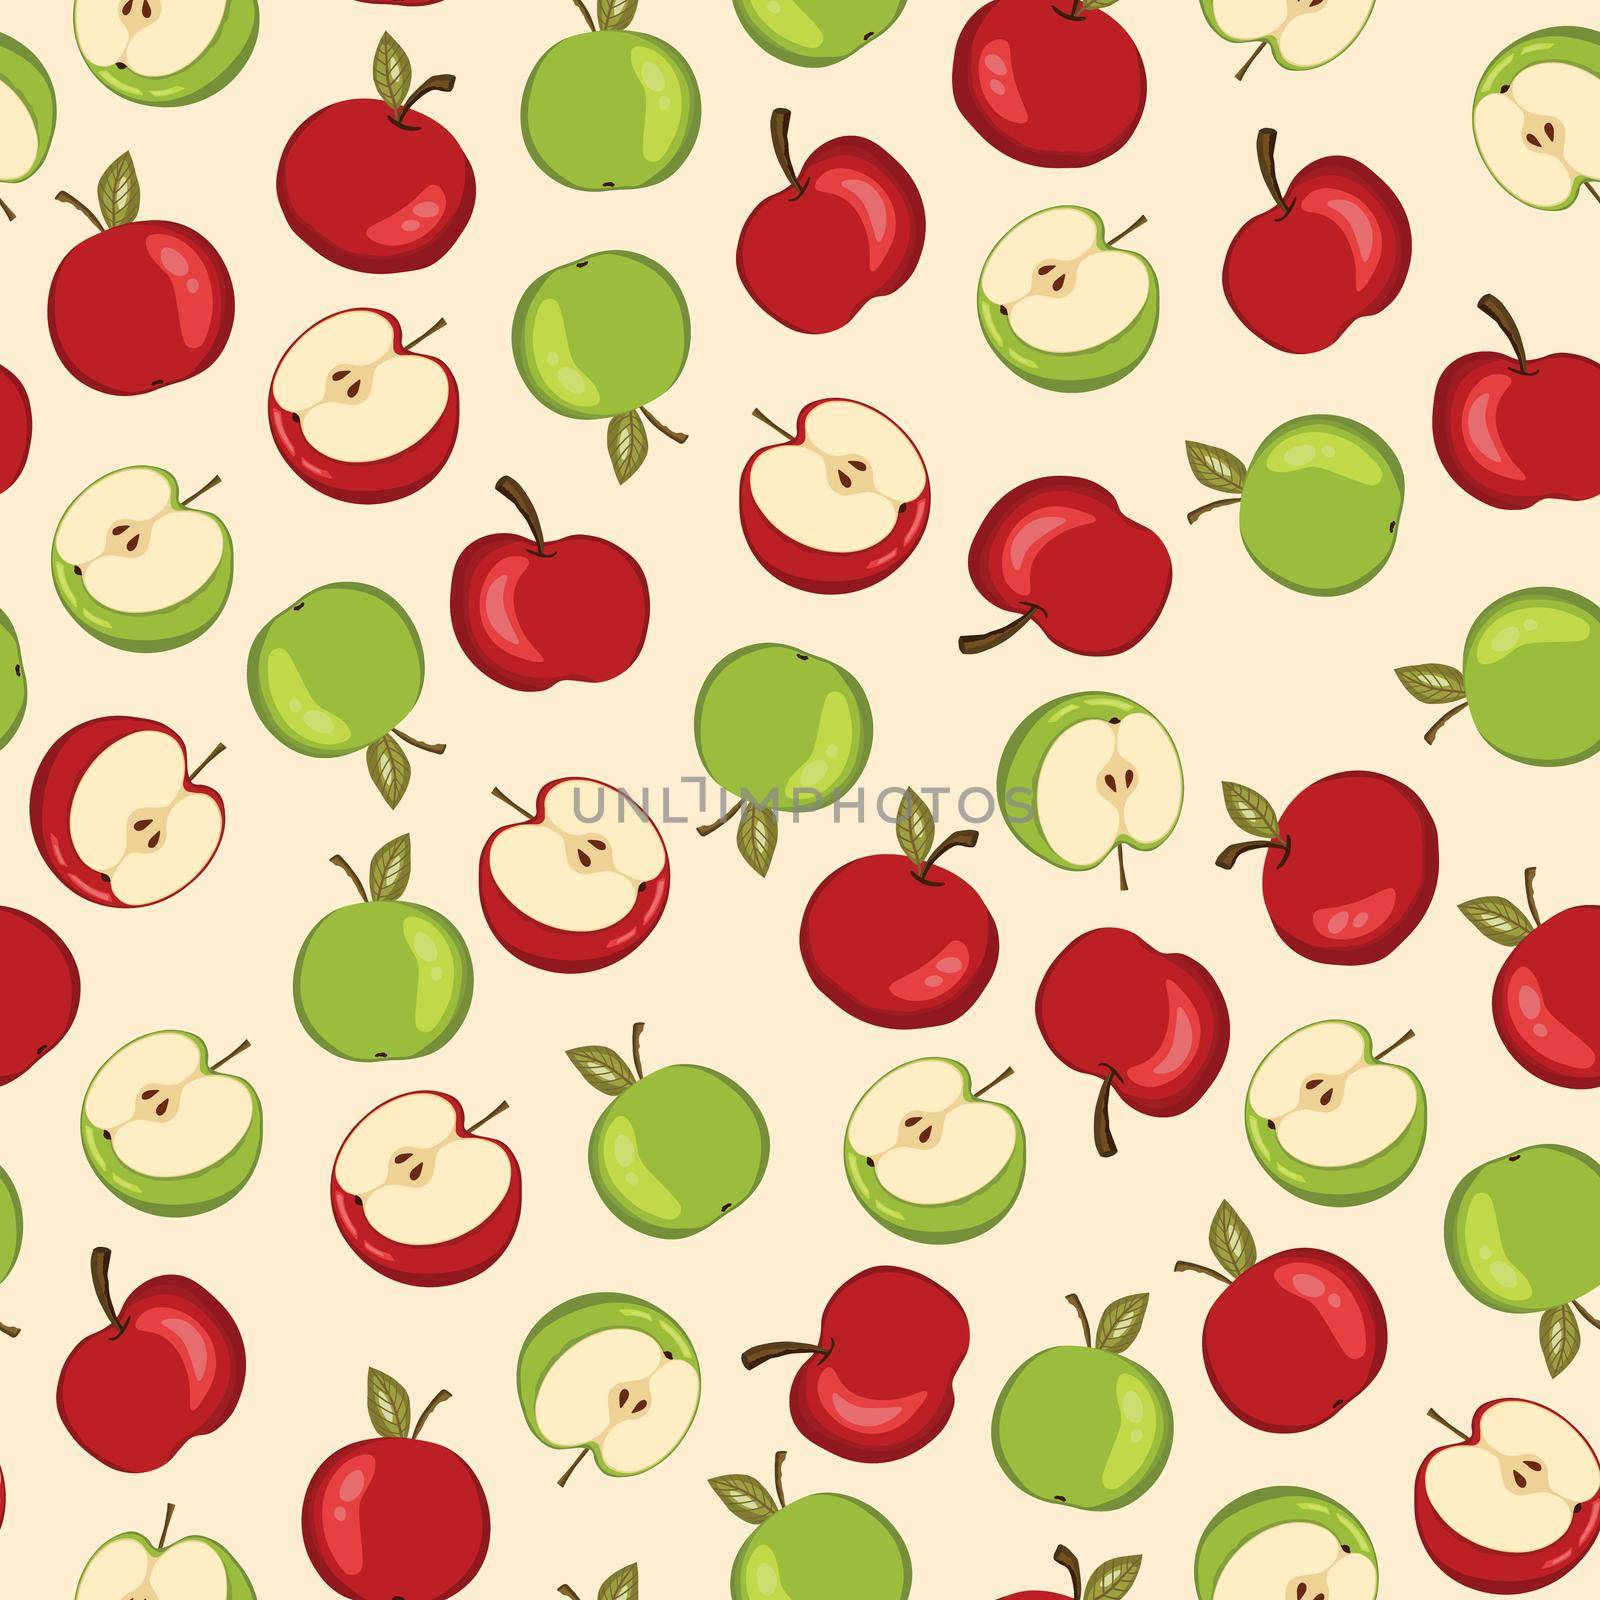 Seamless pattern with apple on white background. Natural delicious fresh ripe tasty fruit. Vector illustration for print, fabric, textile, banner, design. Stylized apples with leaves. Food concept.